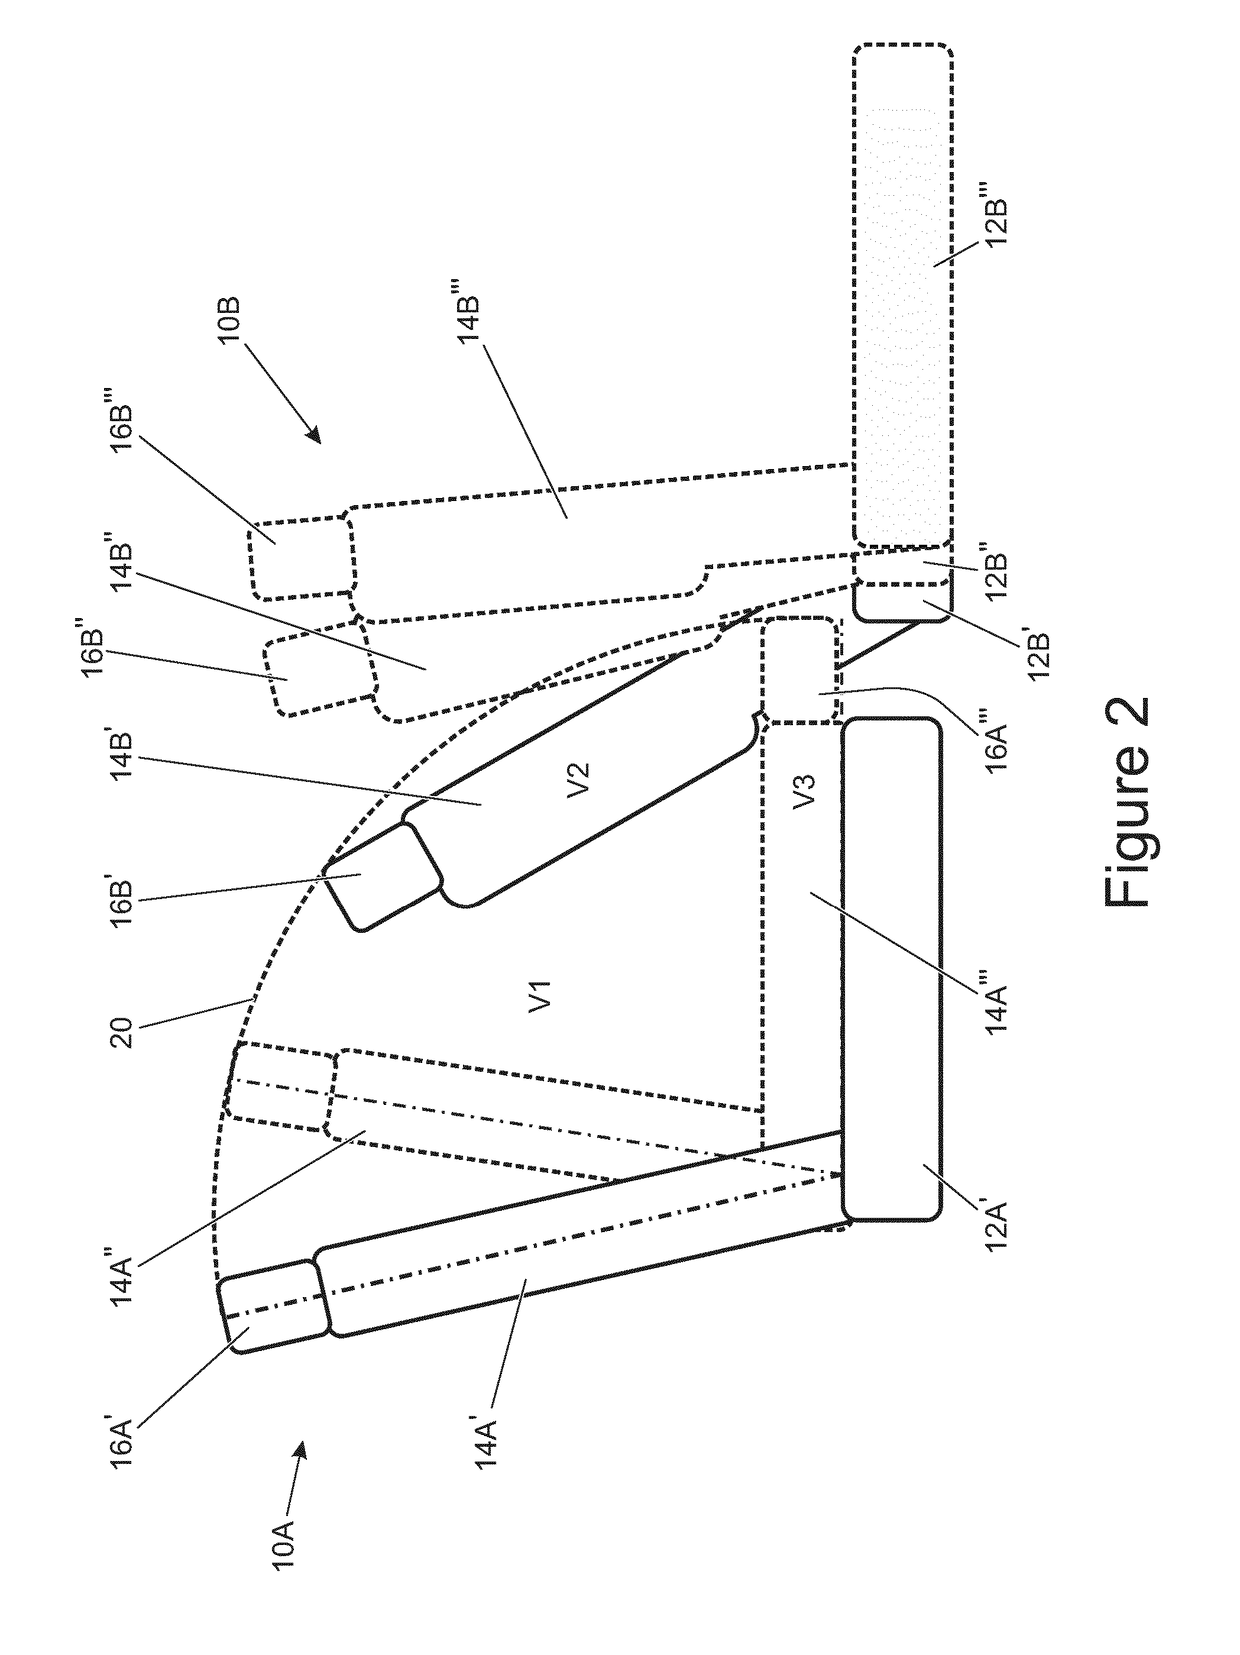 System for folding seats in a vehicle